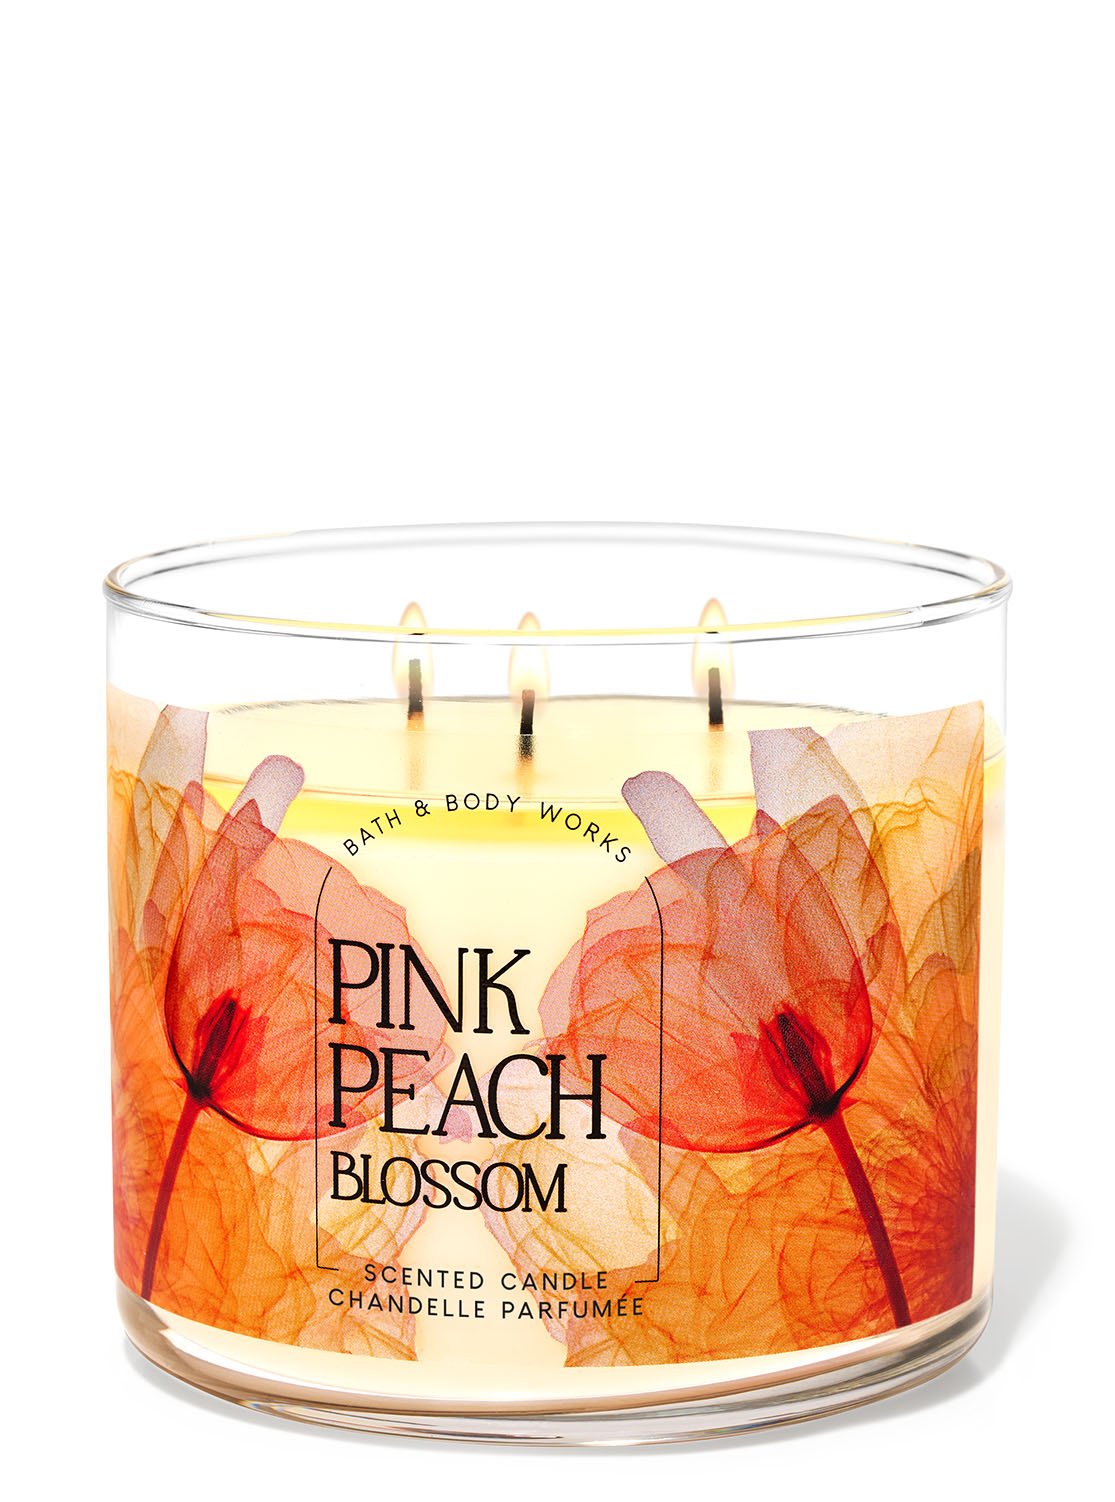 Pink Peach Blossom 3-Wick Candle